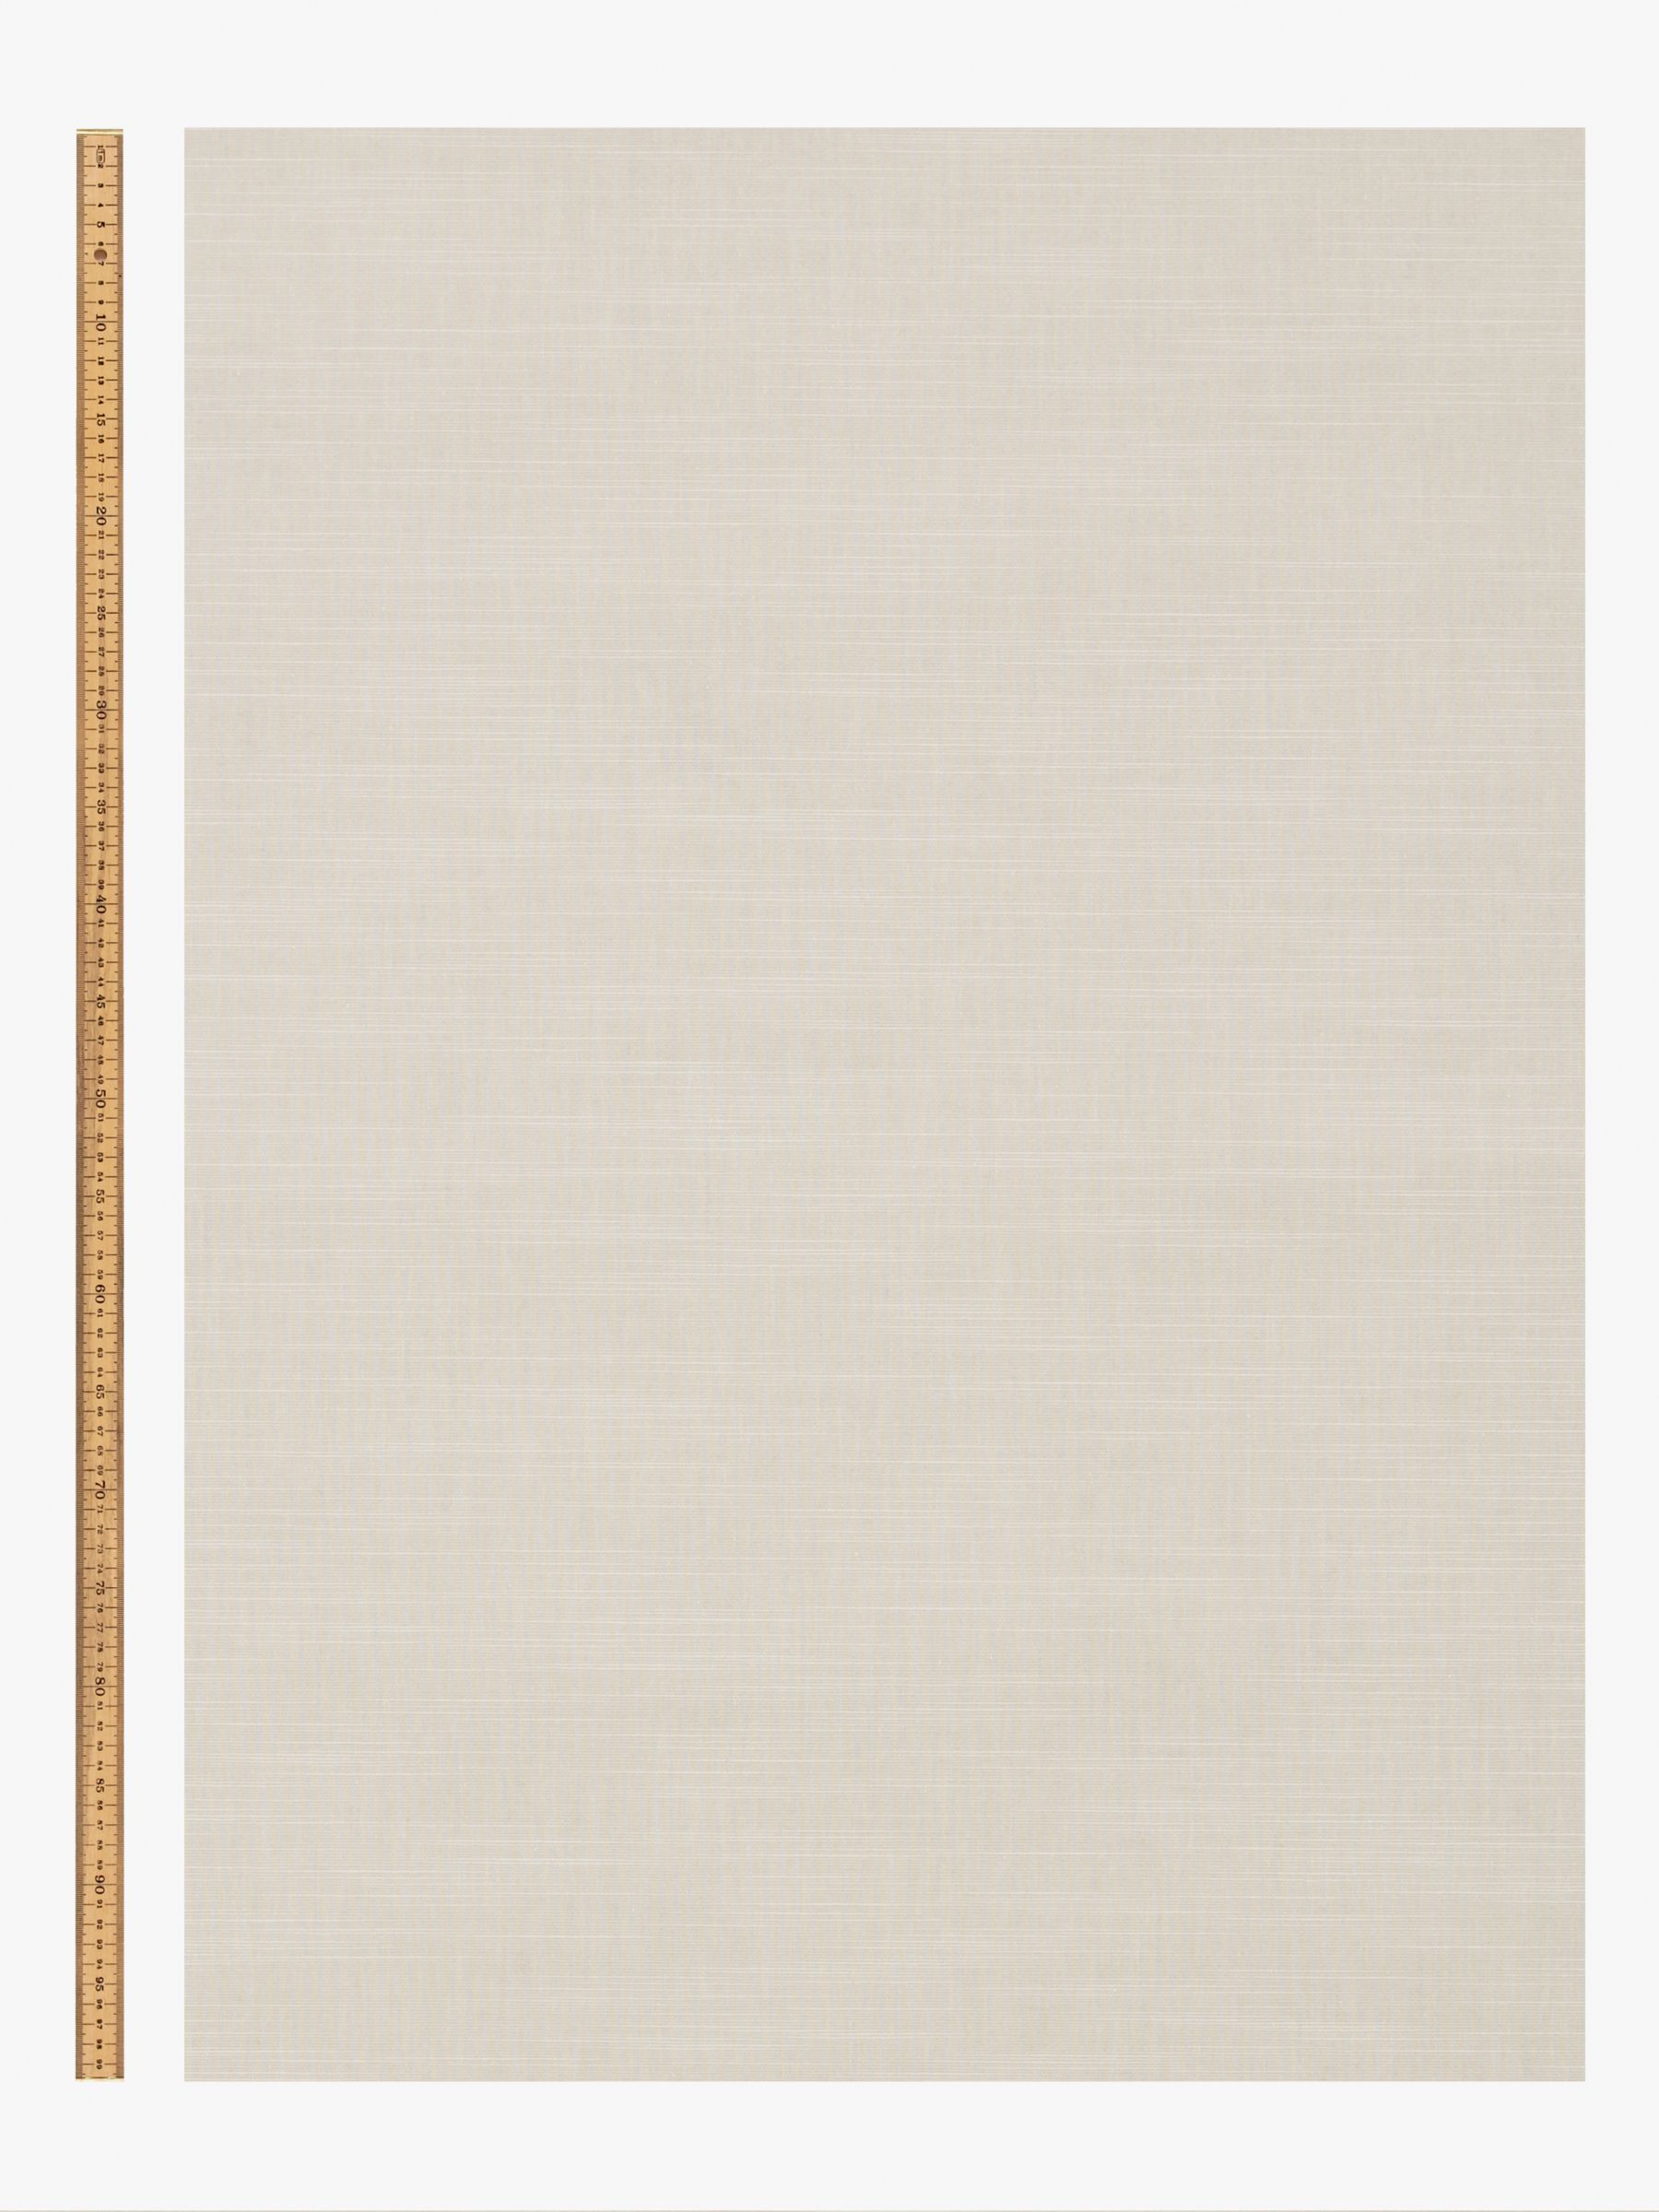 John Lewis Lima Made to Measure Daylight Roller Blind, Cashmere